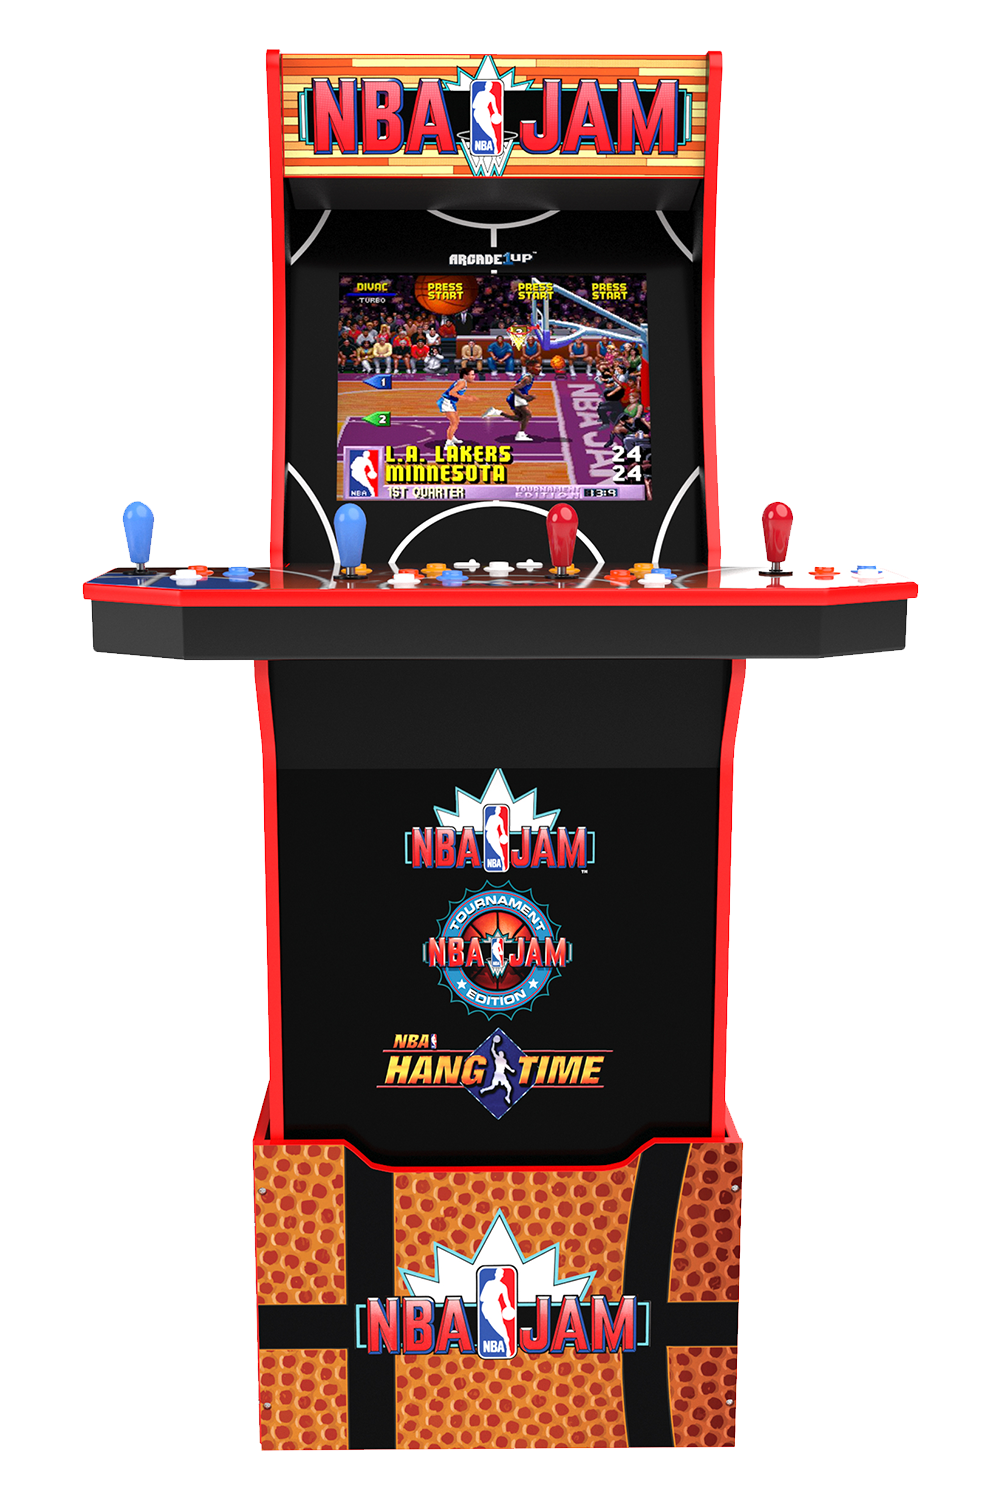 Arcade1up Officially Licensed Arcade Cabinets